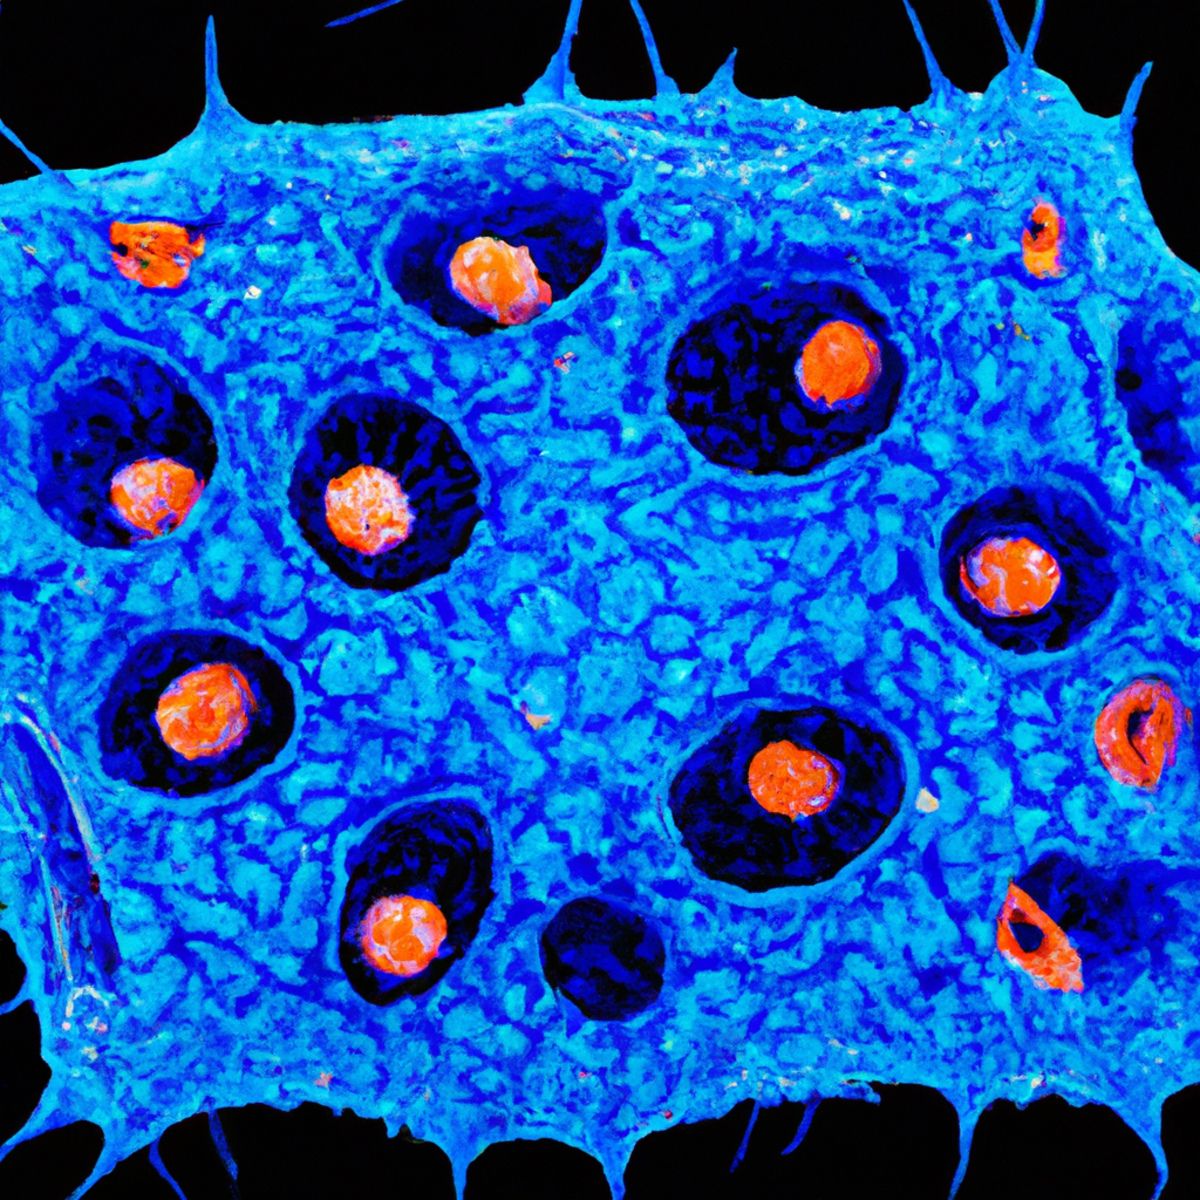 Close-up of a human cell with highlighted Langerhans cells on blue background -Langerhans Cell Histiocytosis (LCH)